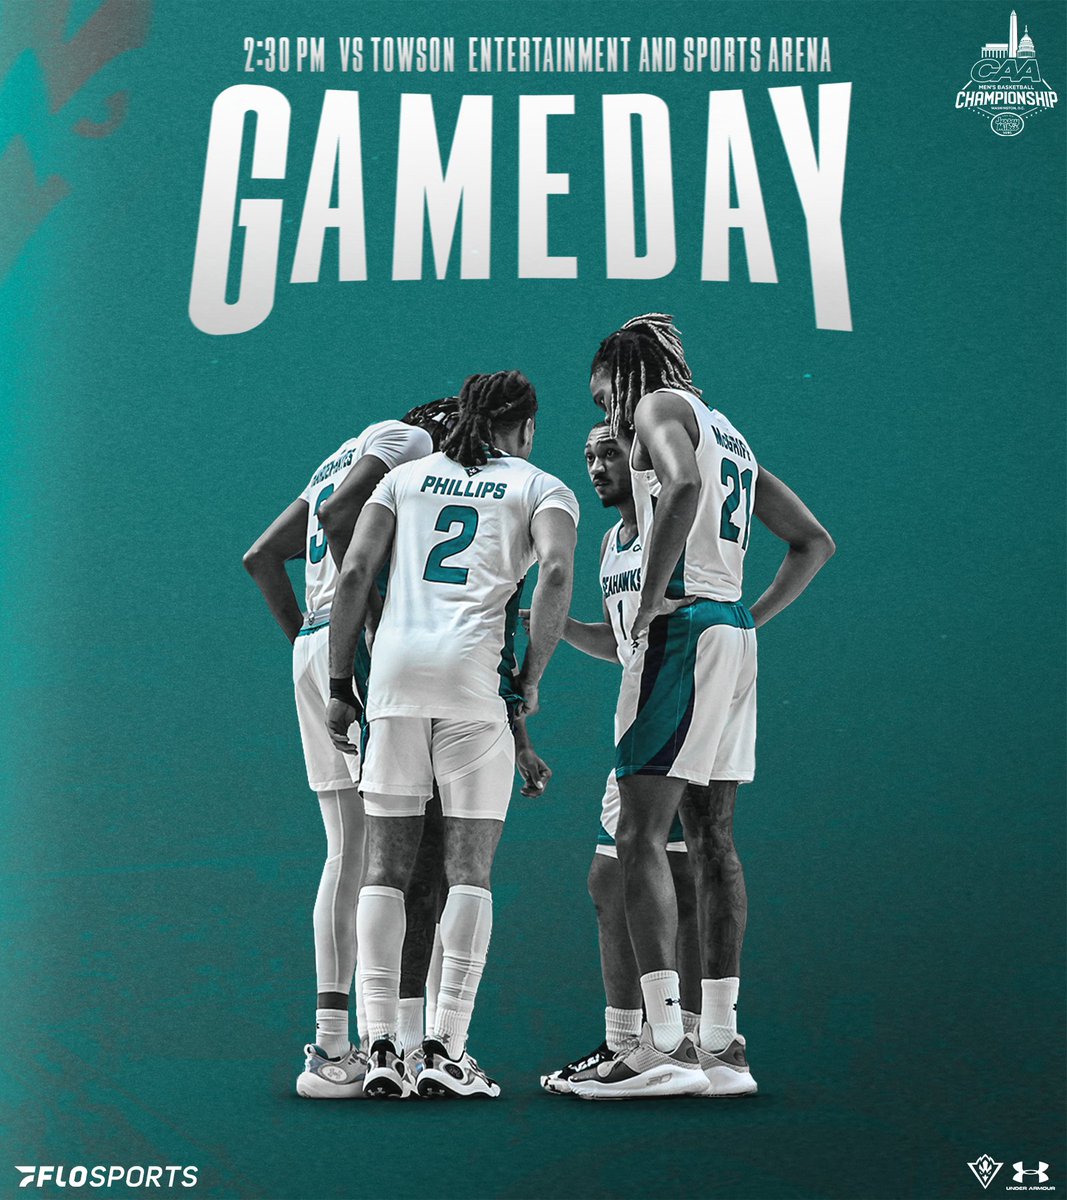 ⏰ 2:30 p.m. 🆚 @towson_mbb 🏟 Entertainment & Sports Arena 📺 flosports.link/3APNhcs 🔉959thebreeze.com (audio only) 📊 UNCWStats.com You can also listen on the Sunrise Radio App